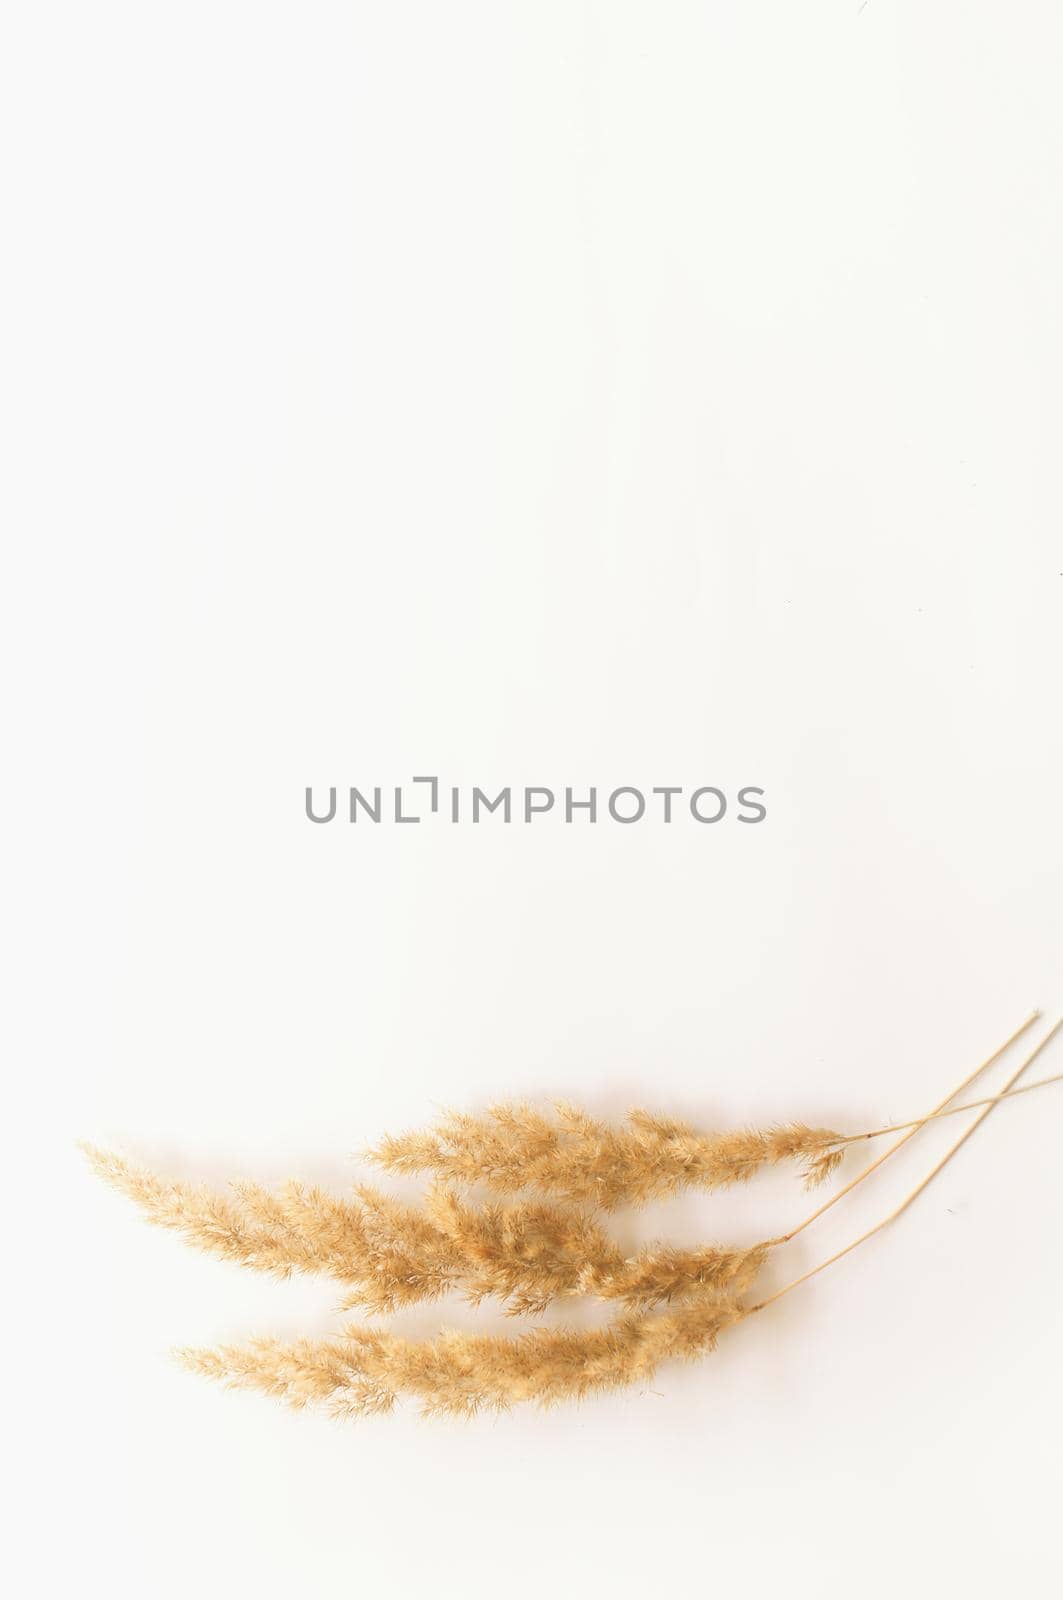 dried grass on a white background by ozornina